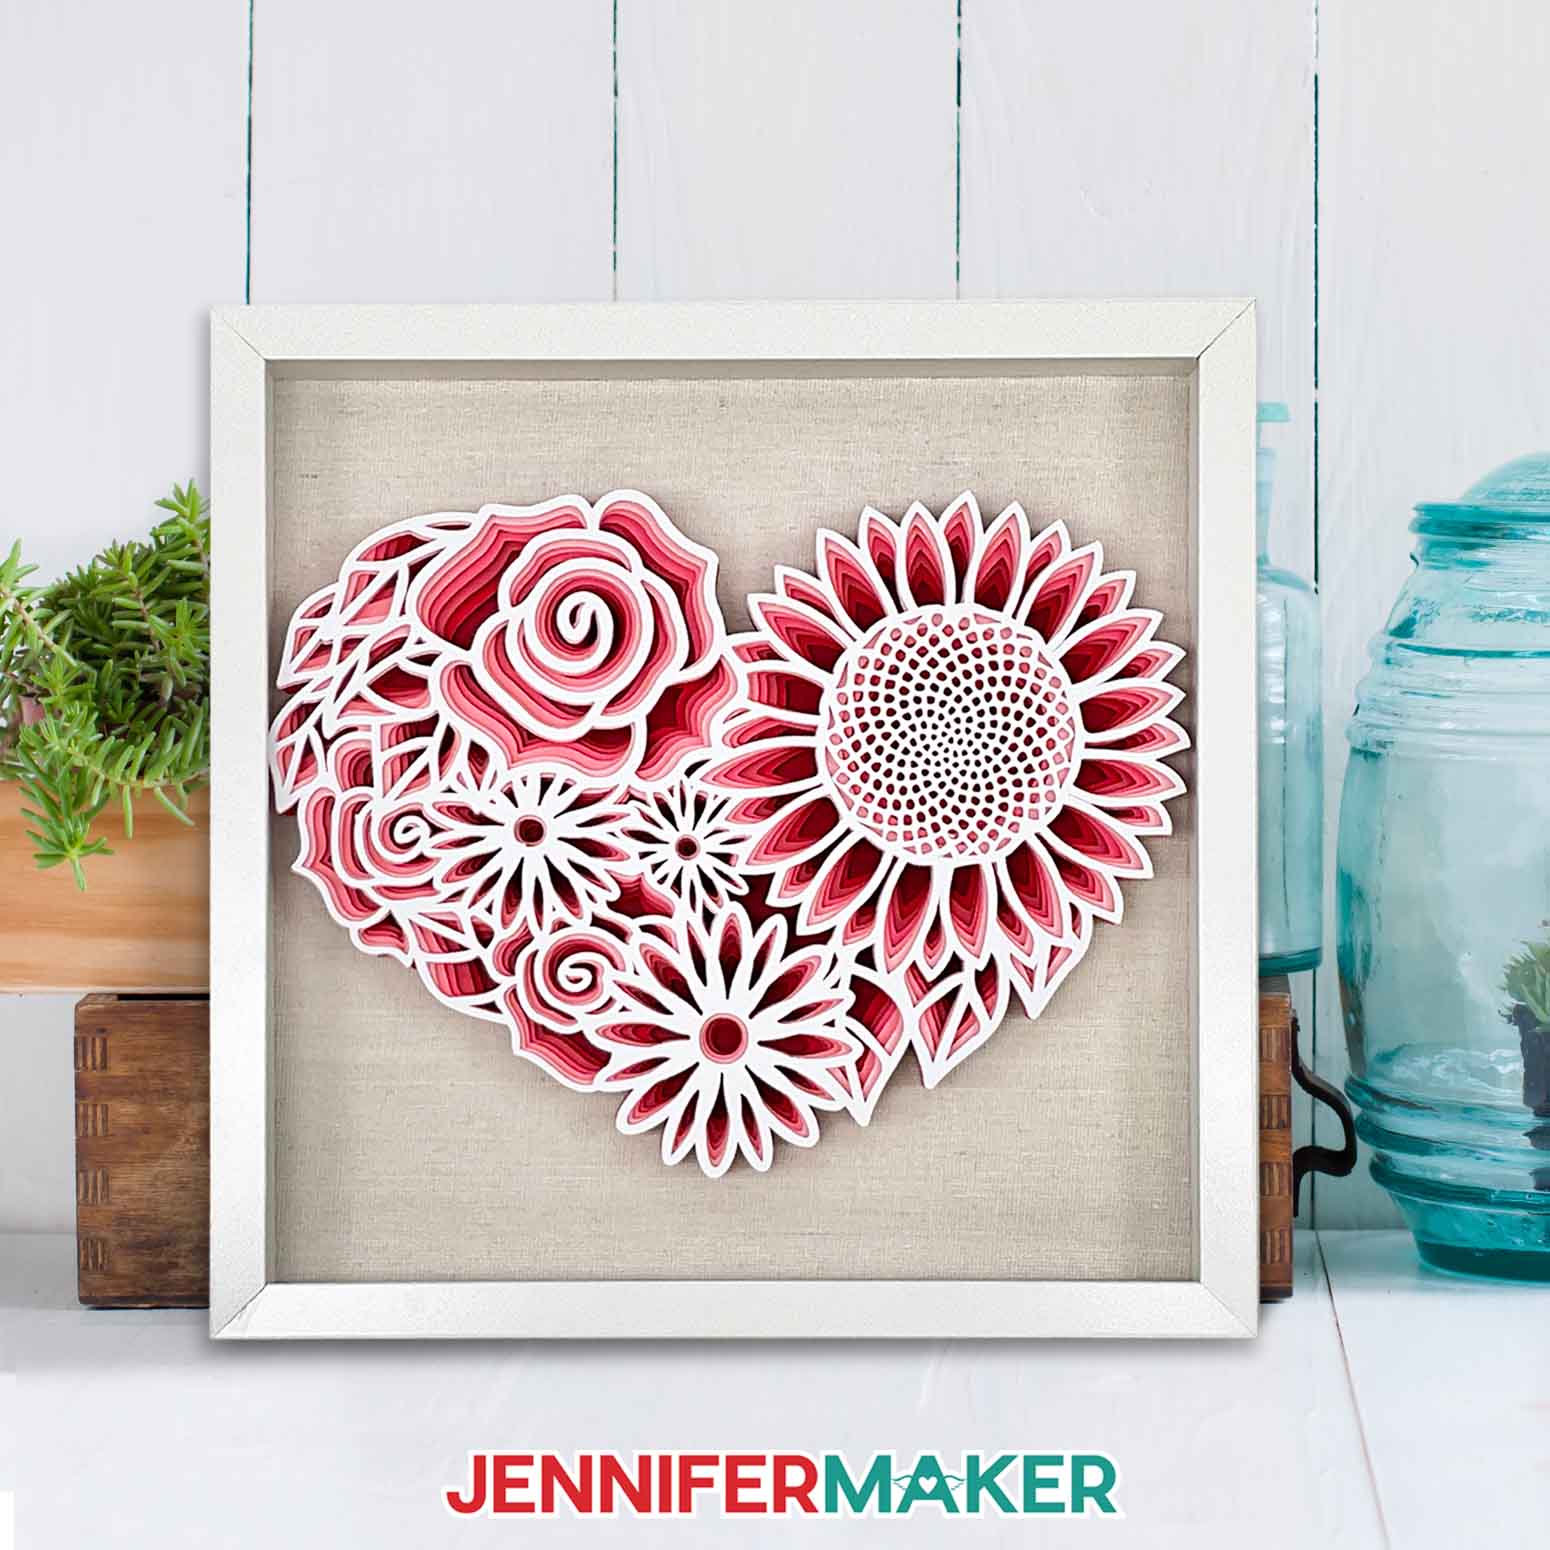 Framed layered cardstock project in shades of red and white made using a Cricut and a floral heart SVG.